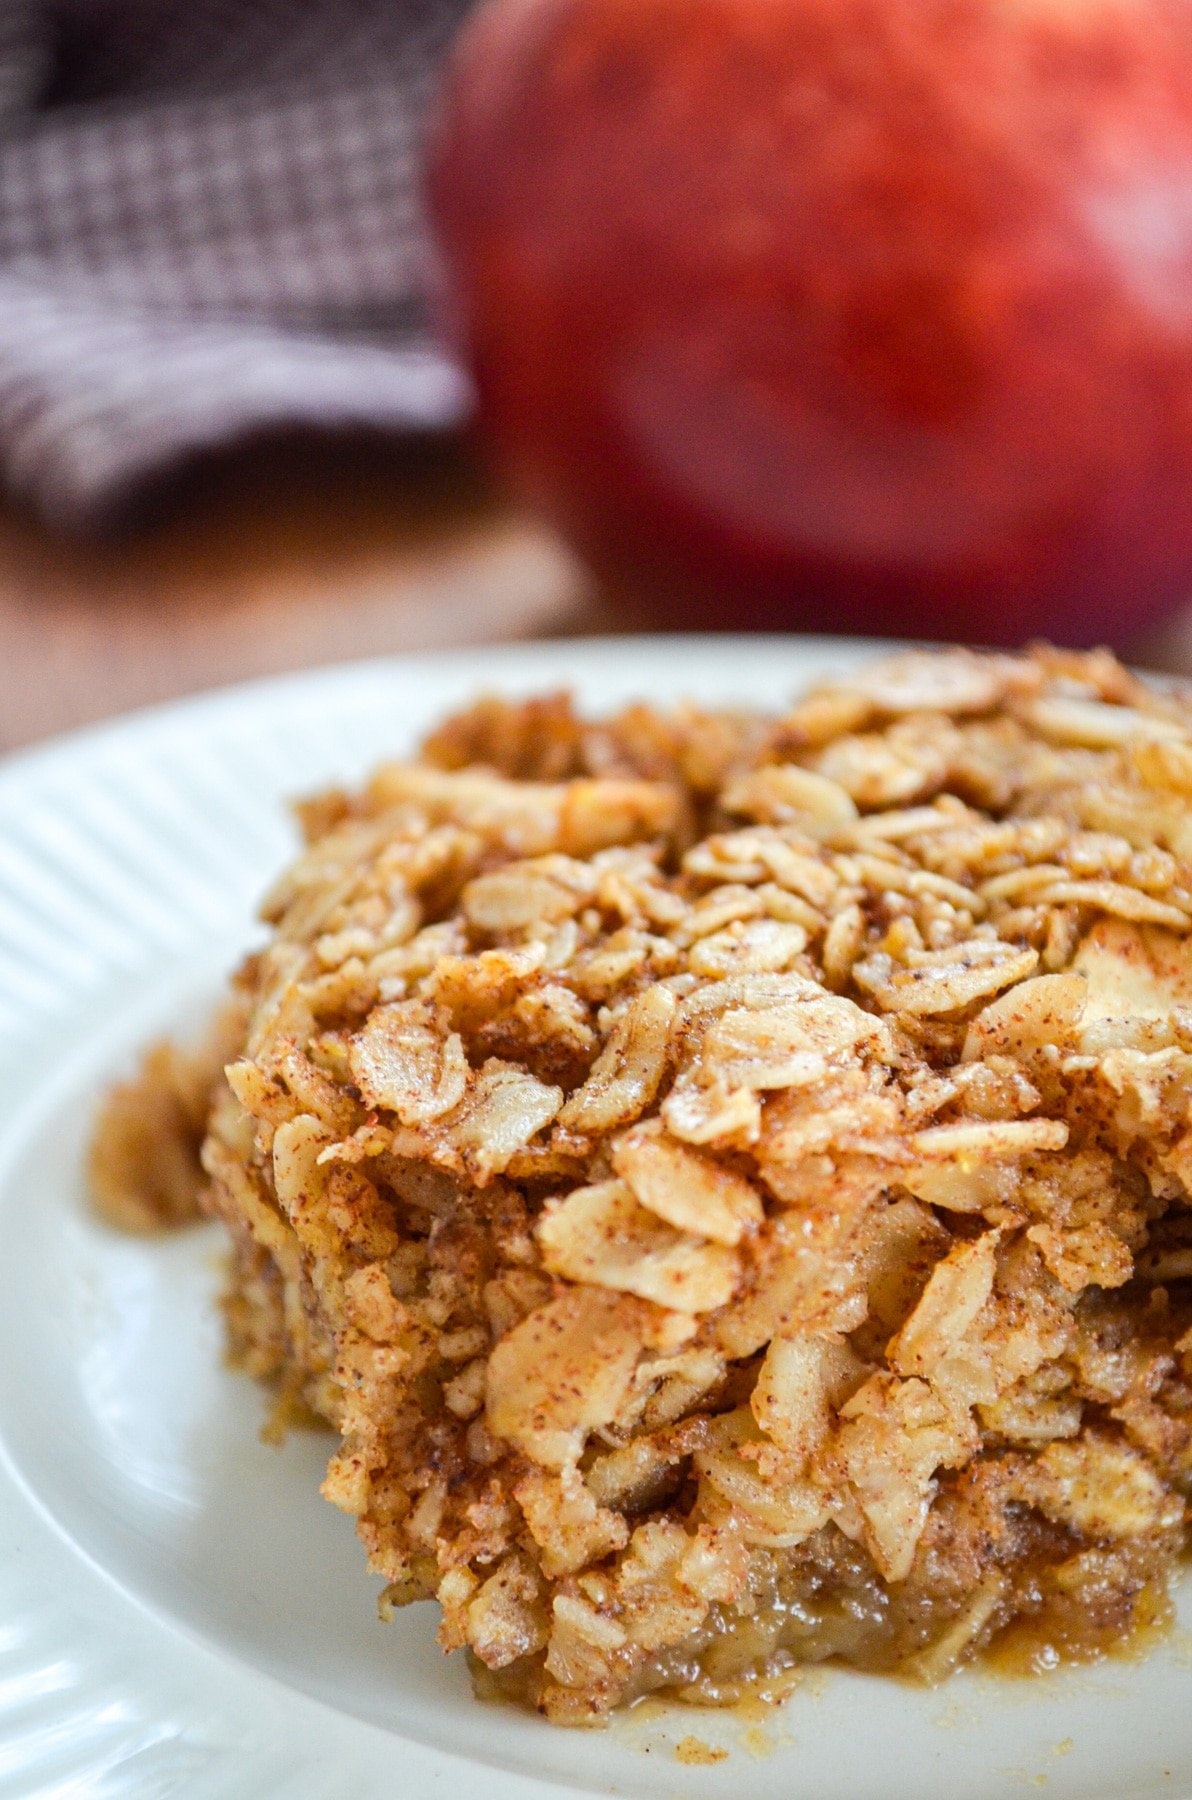 A close up of a piece of apple cinnamon baked oatmeal.